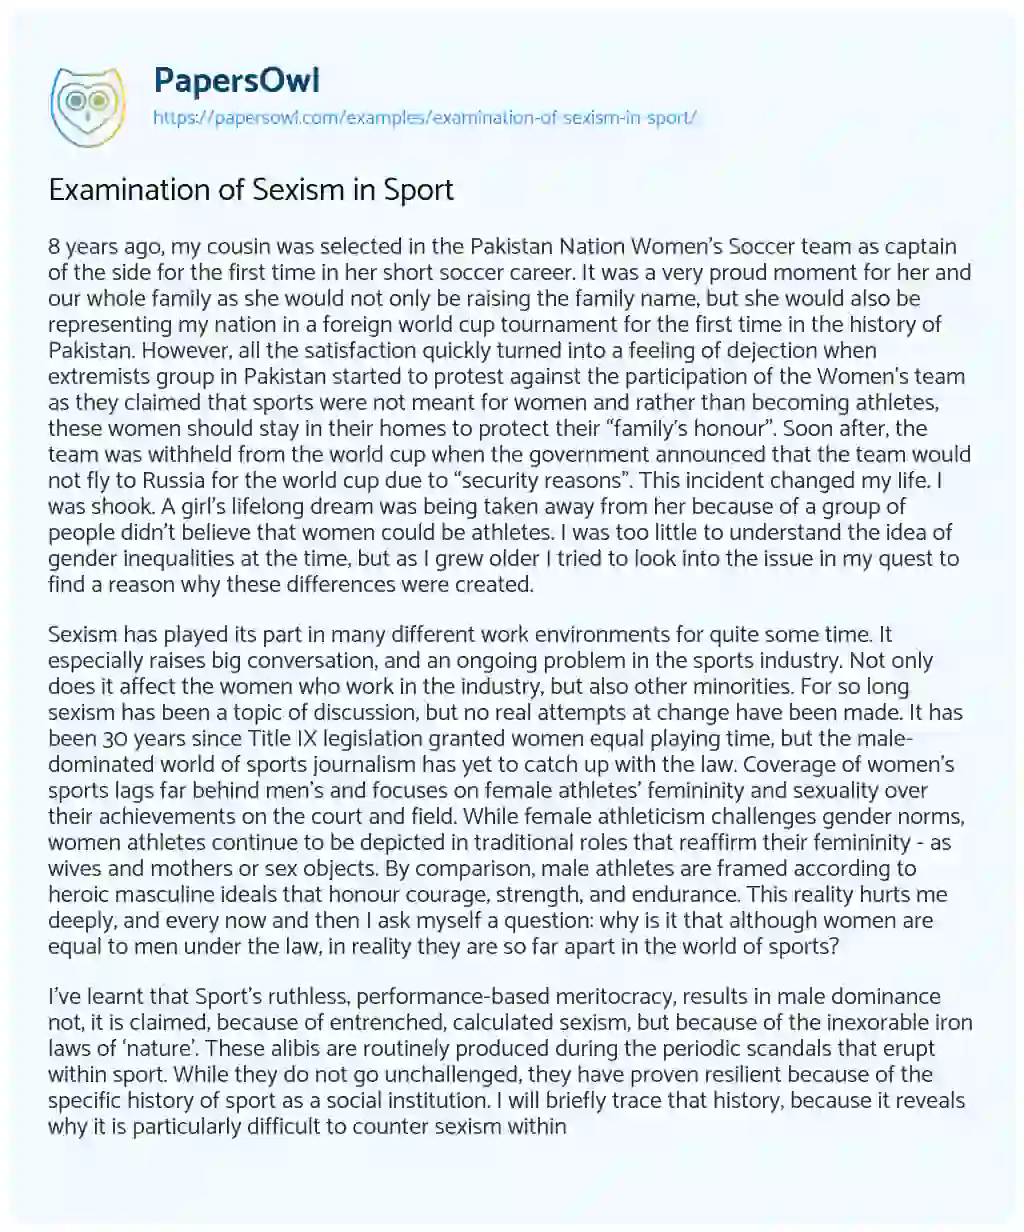 Essay on Examination of Sexism in Sport